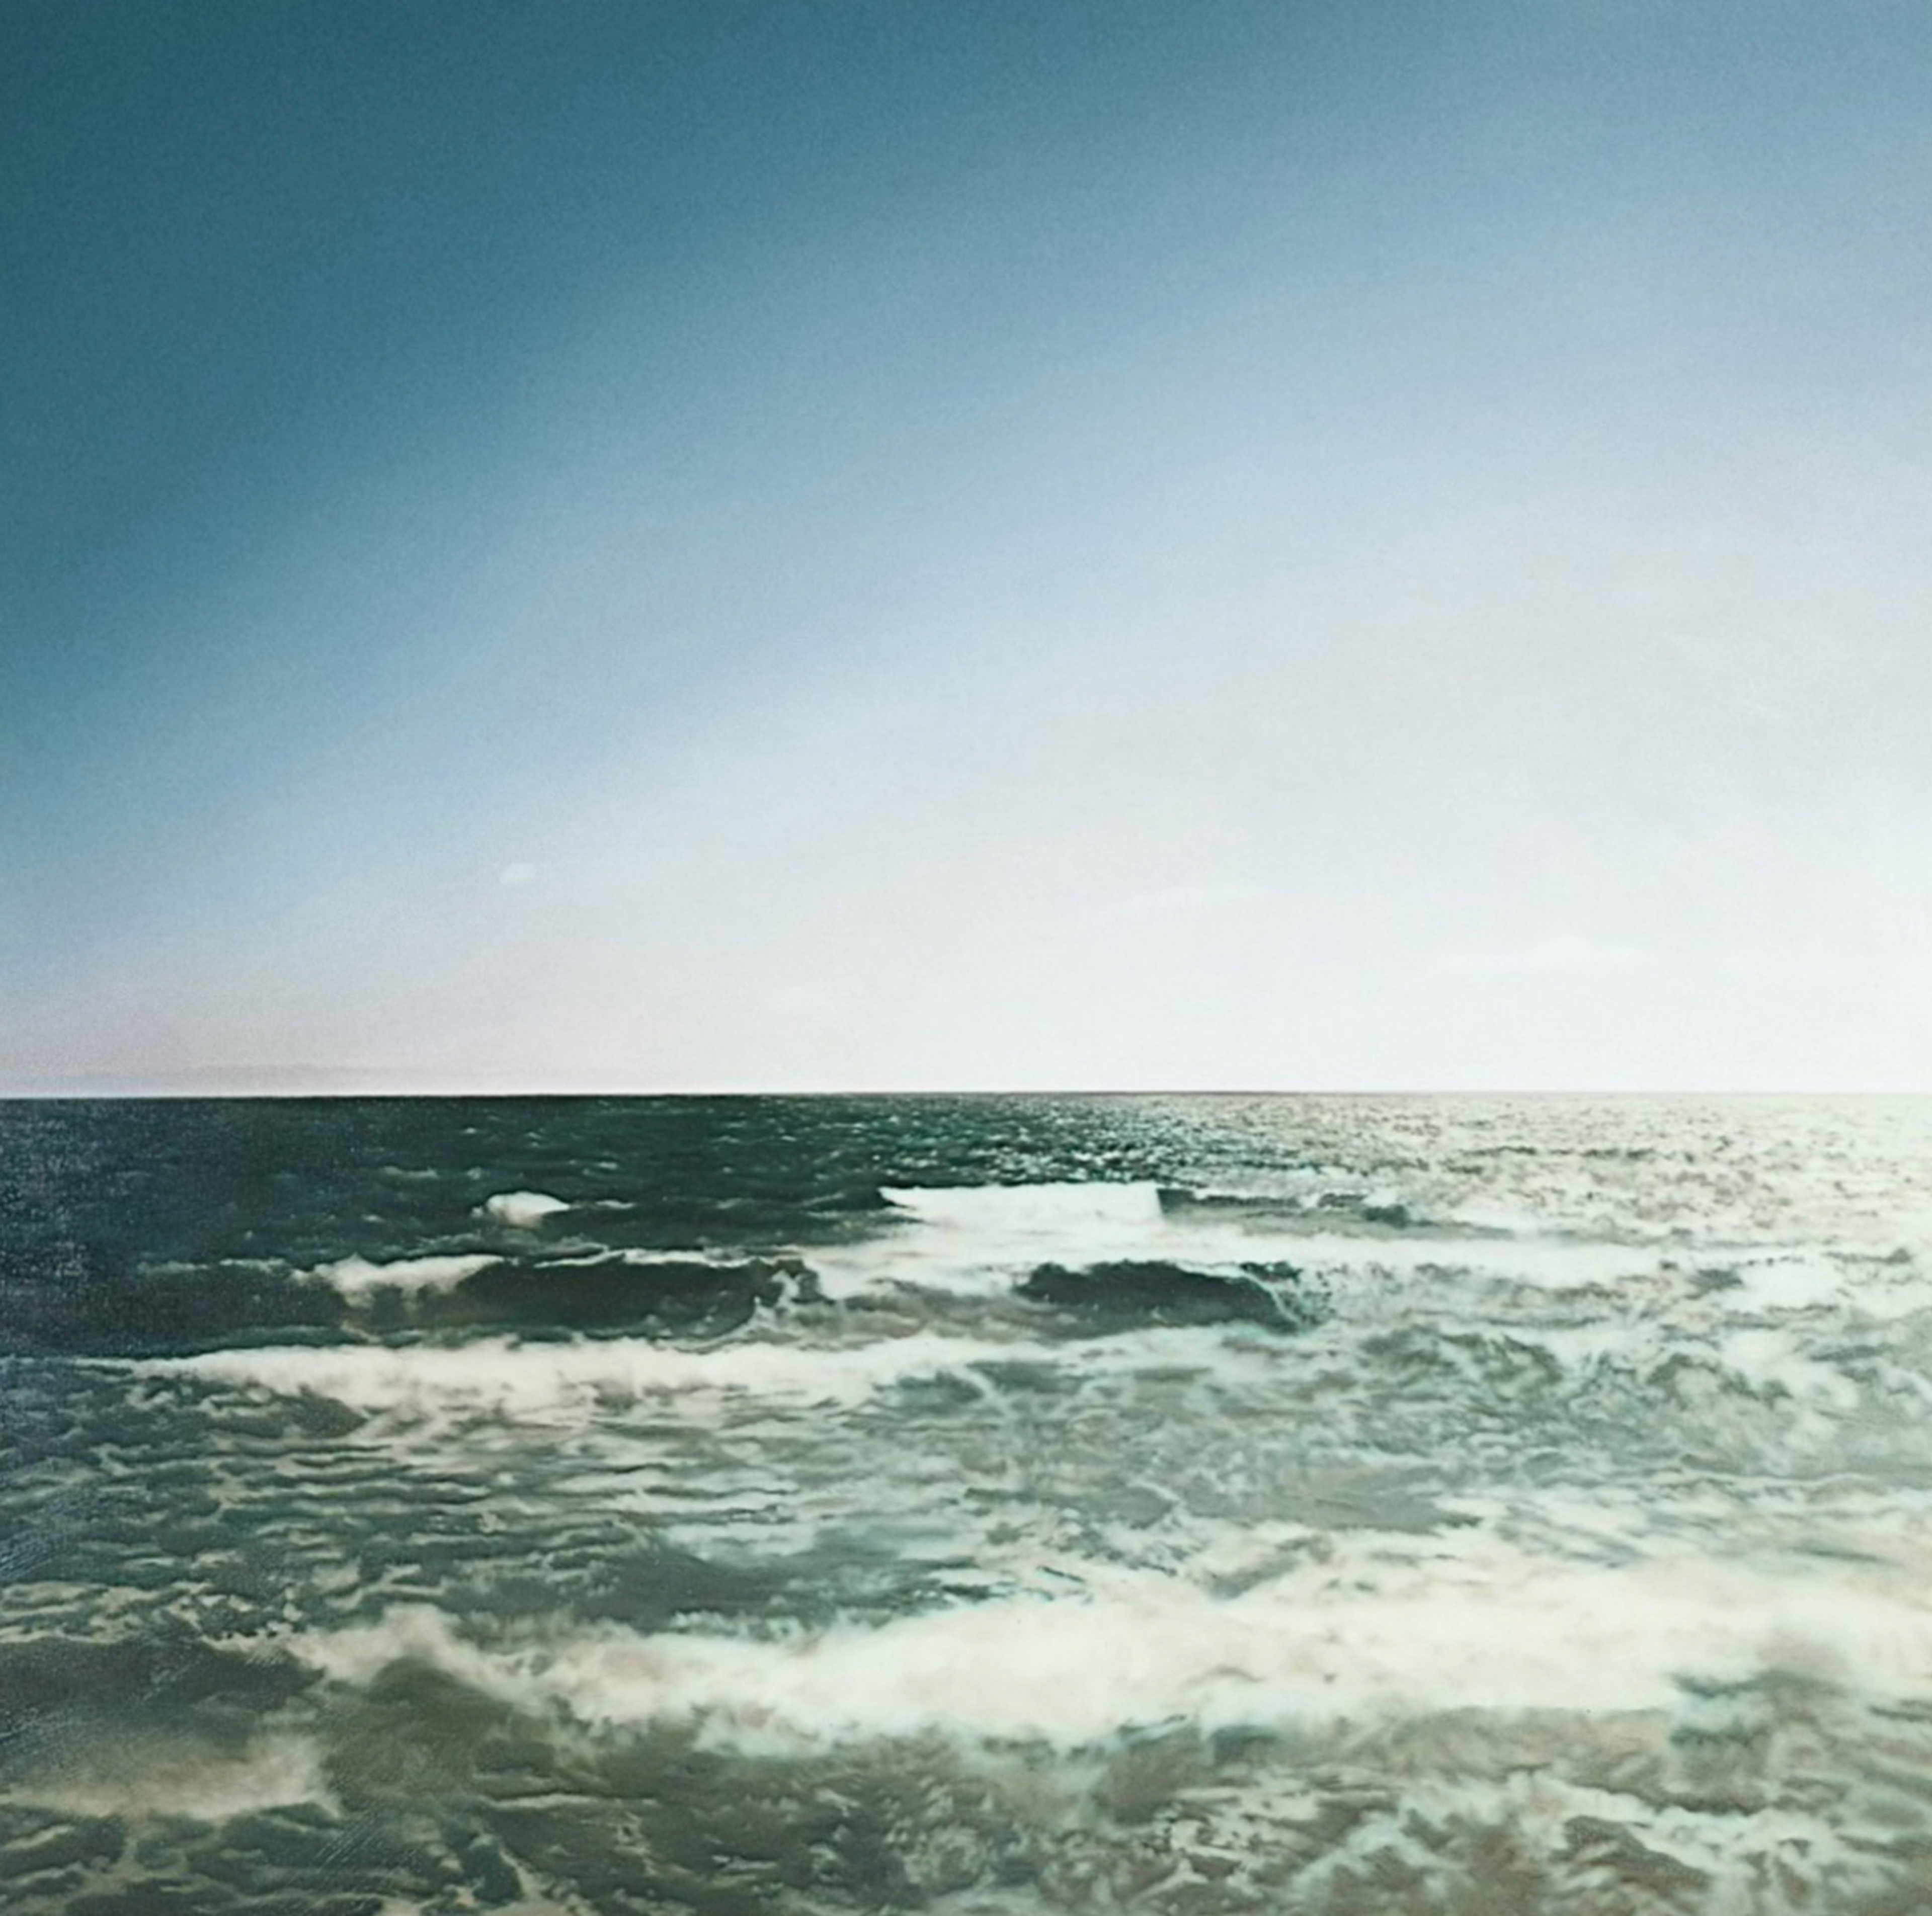 Photorealist painting by Gerhard Richter, depicting the sea in murky green against a bright white and blue sky.